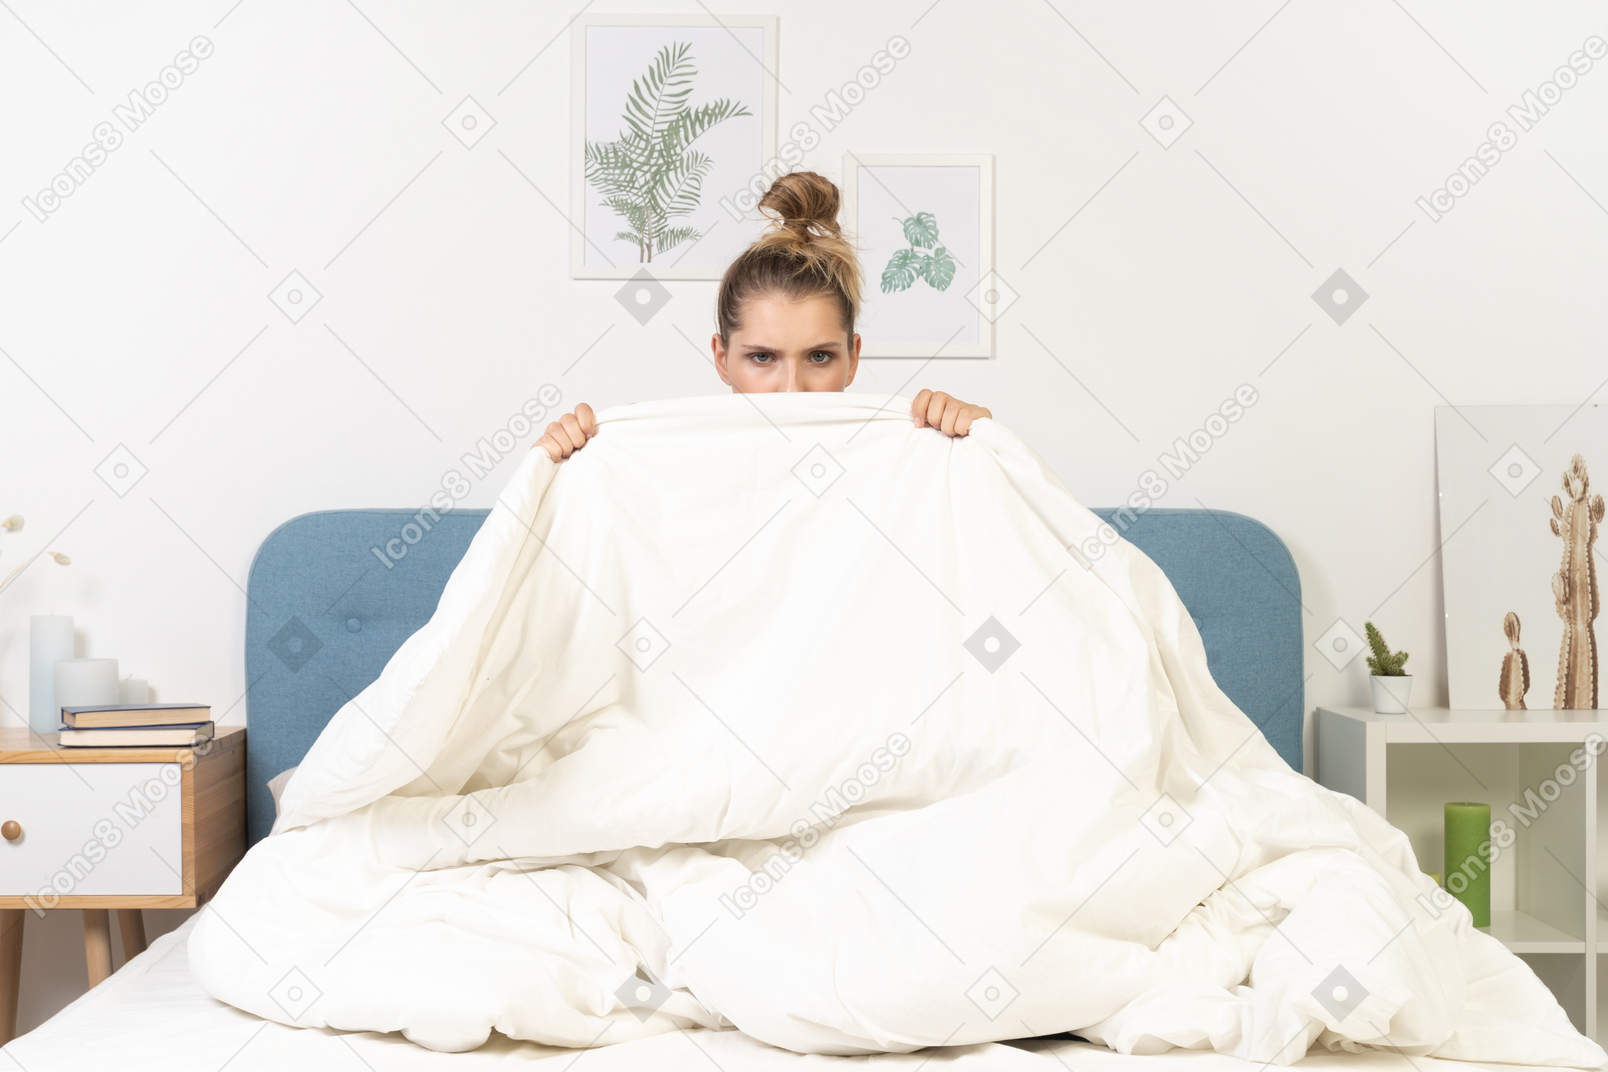 Front view of a young woman in pajamas hiding behind the blanket staying in bed